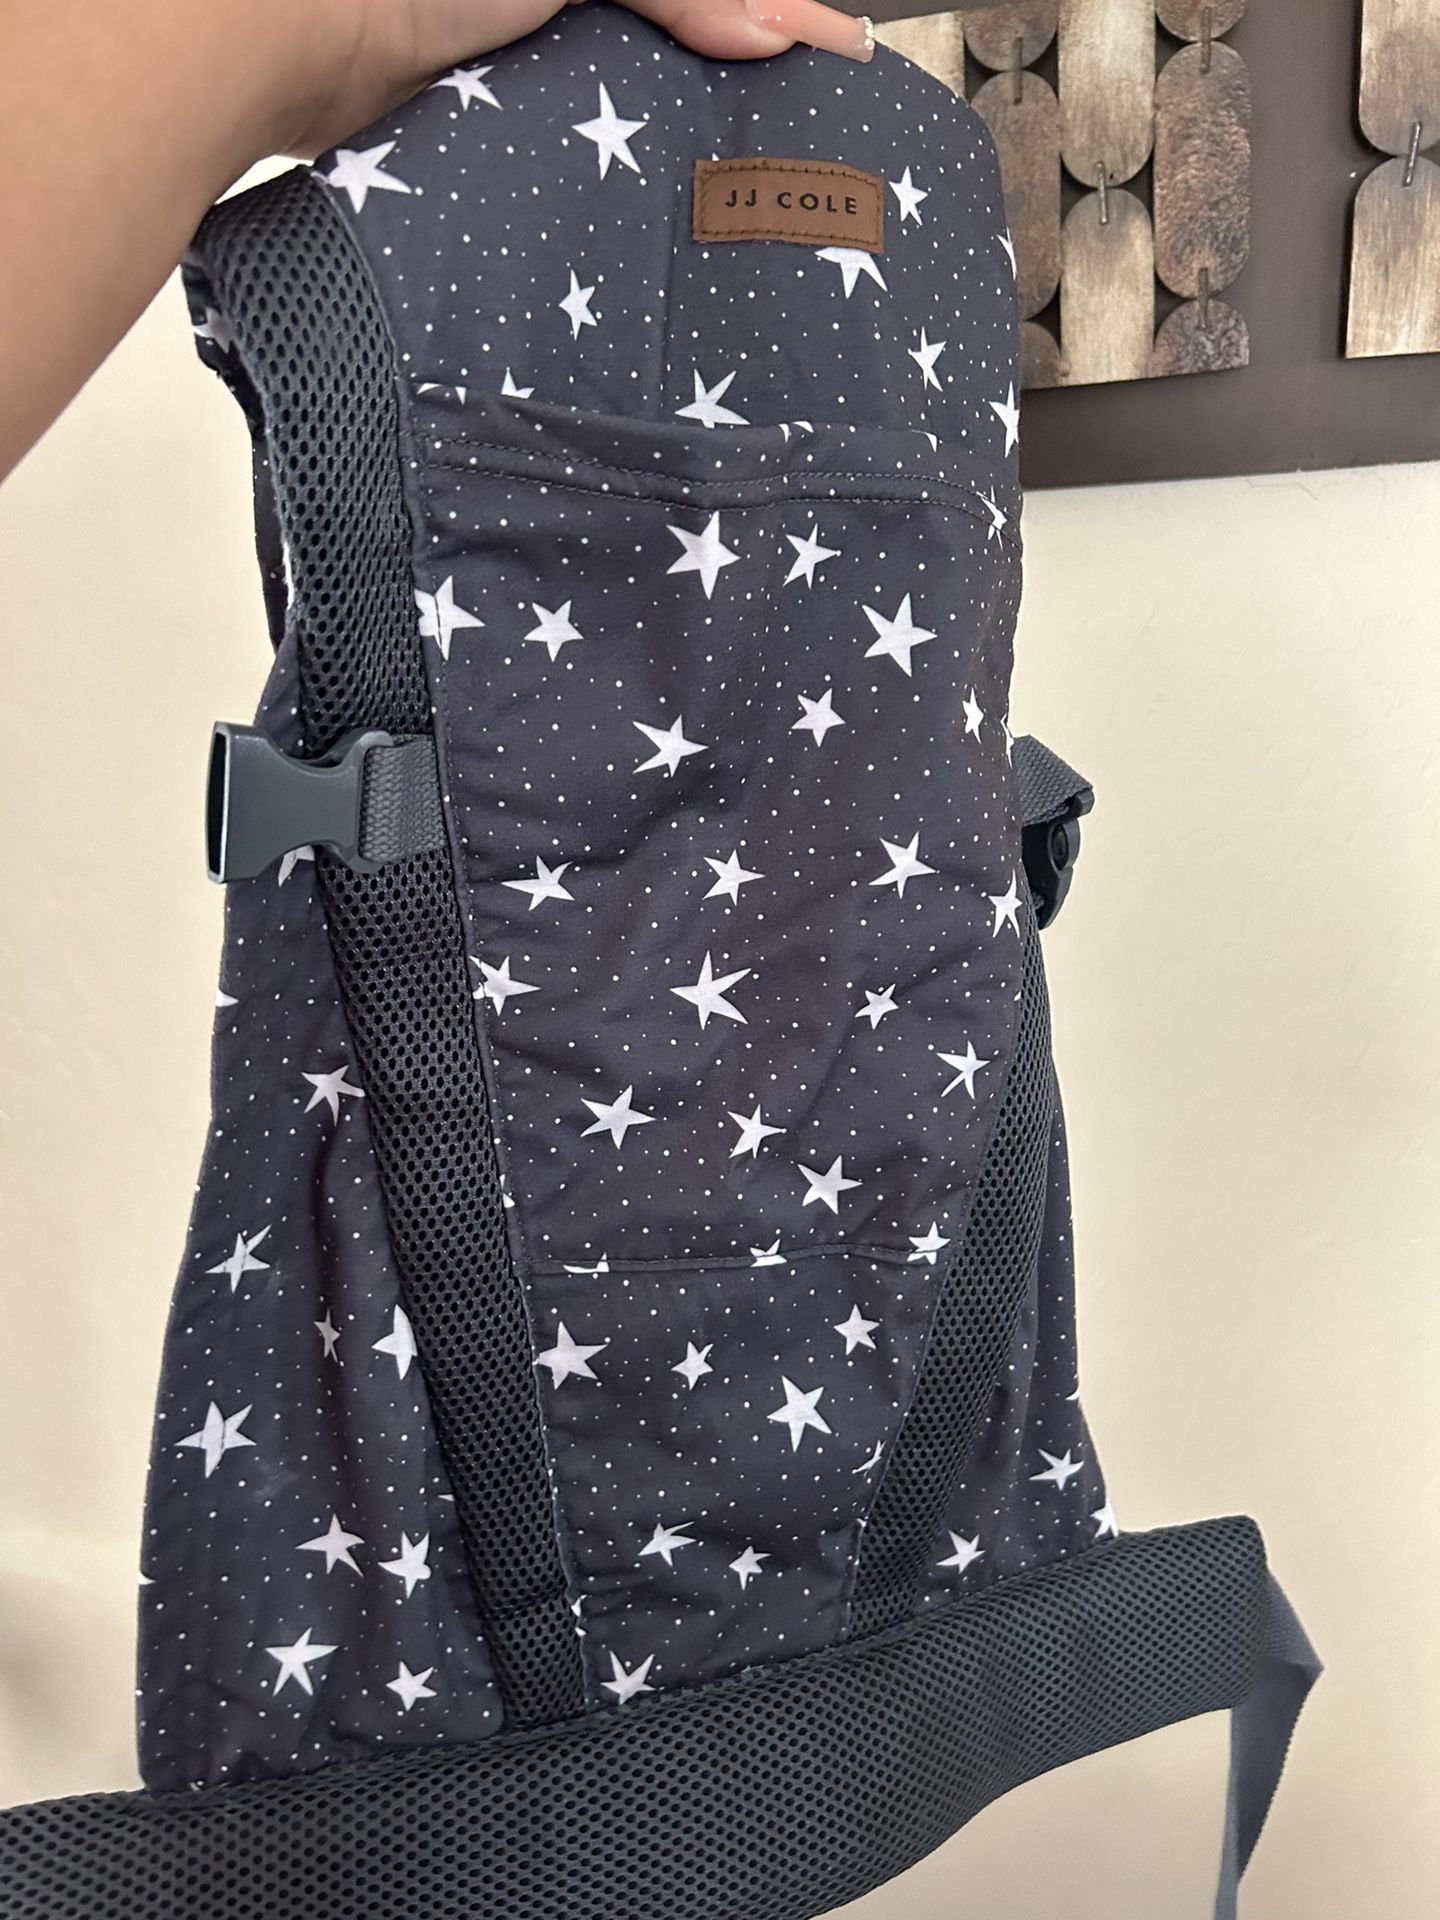 Baby Carrier $15